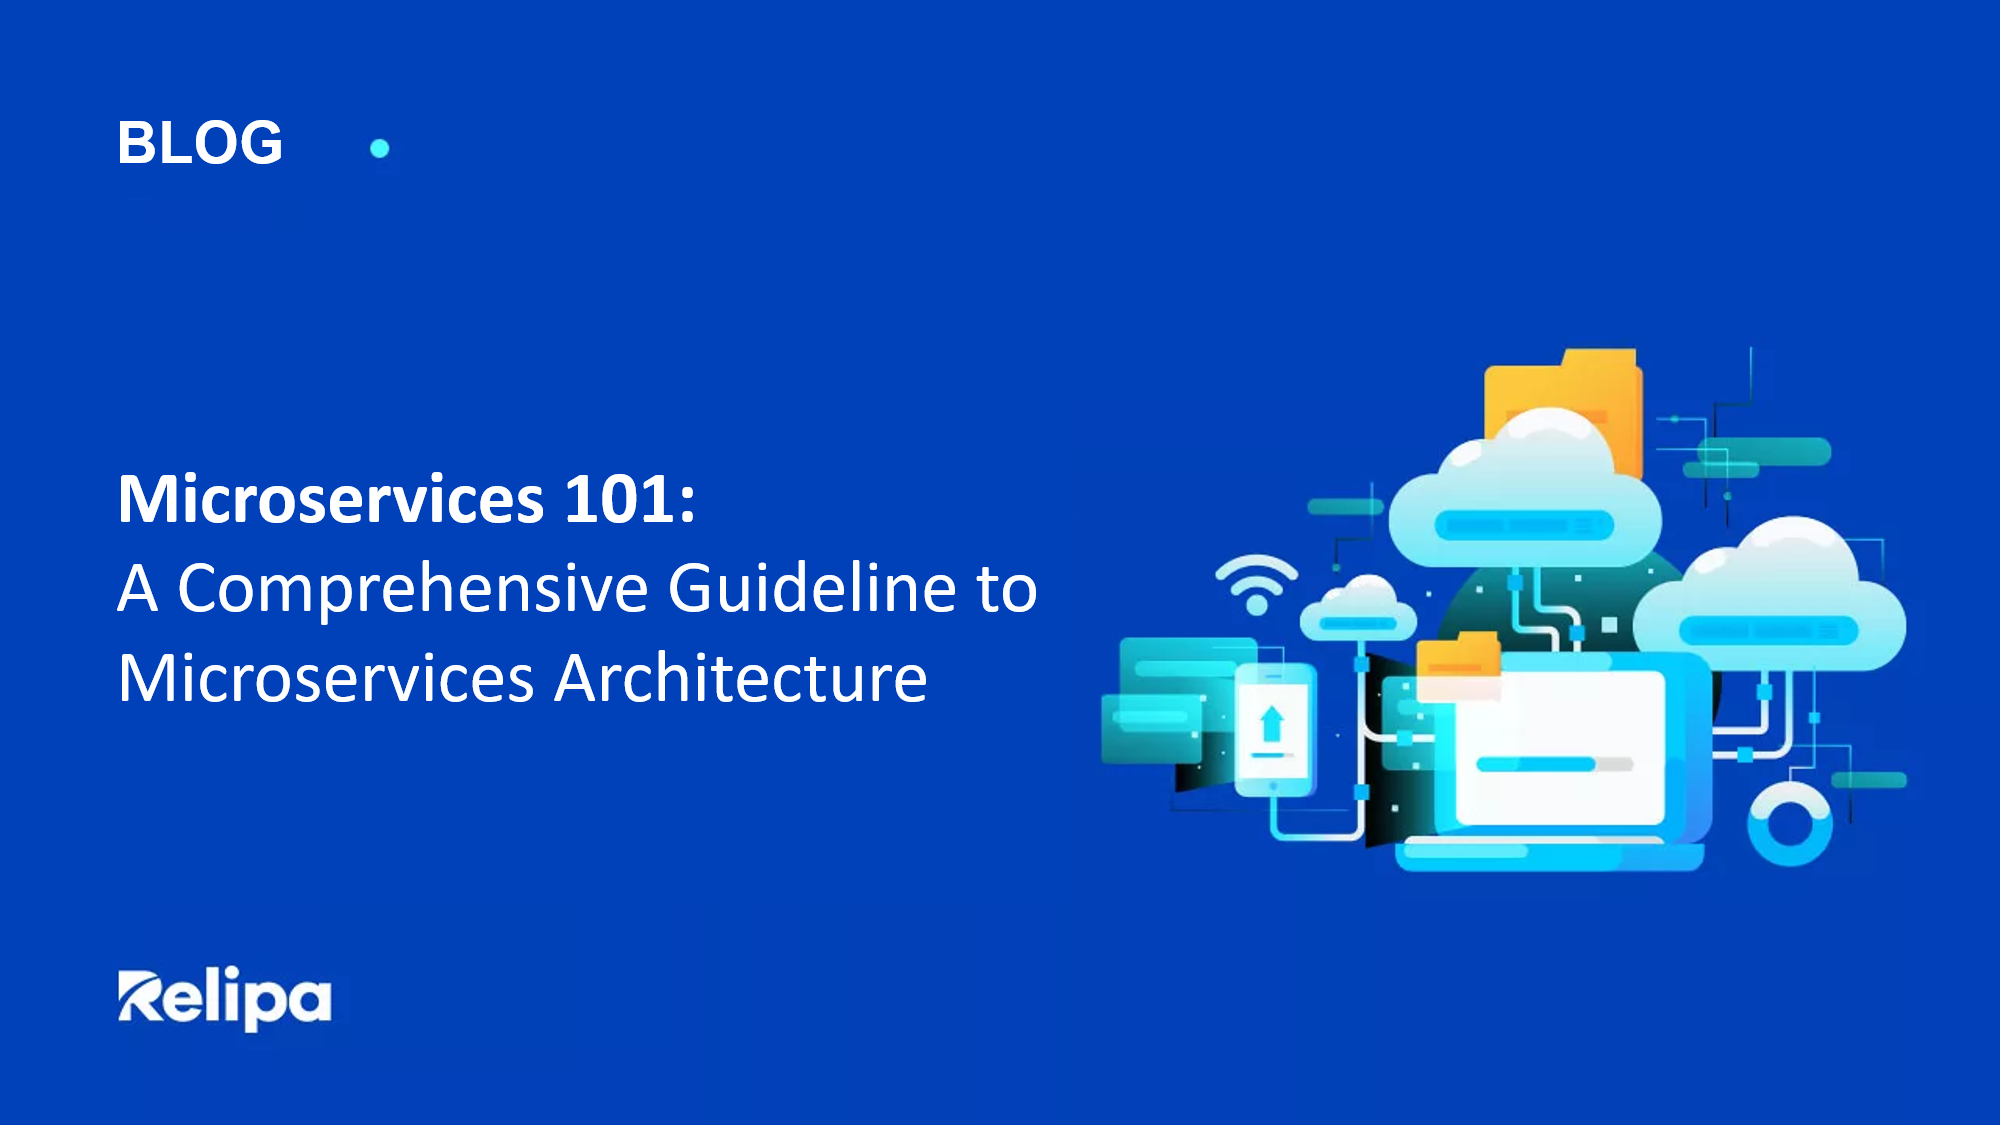 Microservices 101: A Comprehensive Guideline to Microservices Architecture. Comparison with Monolithic Architecture and Real-life Use Cases of Microservices